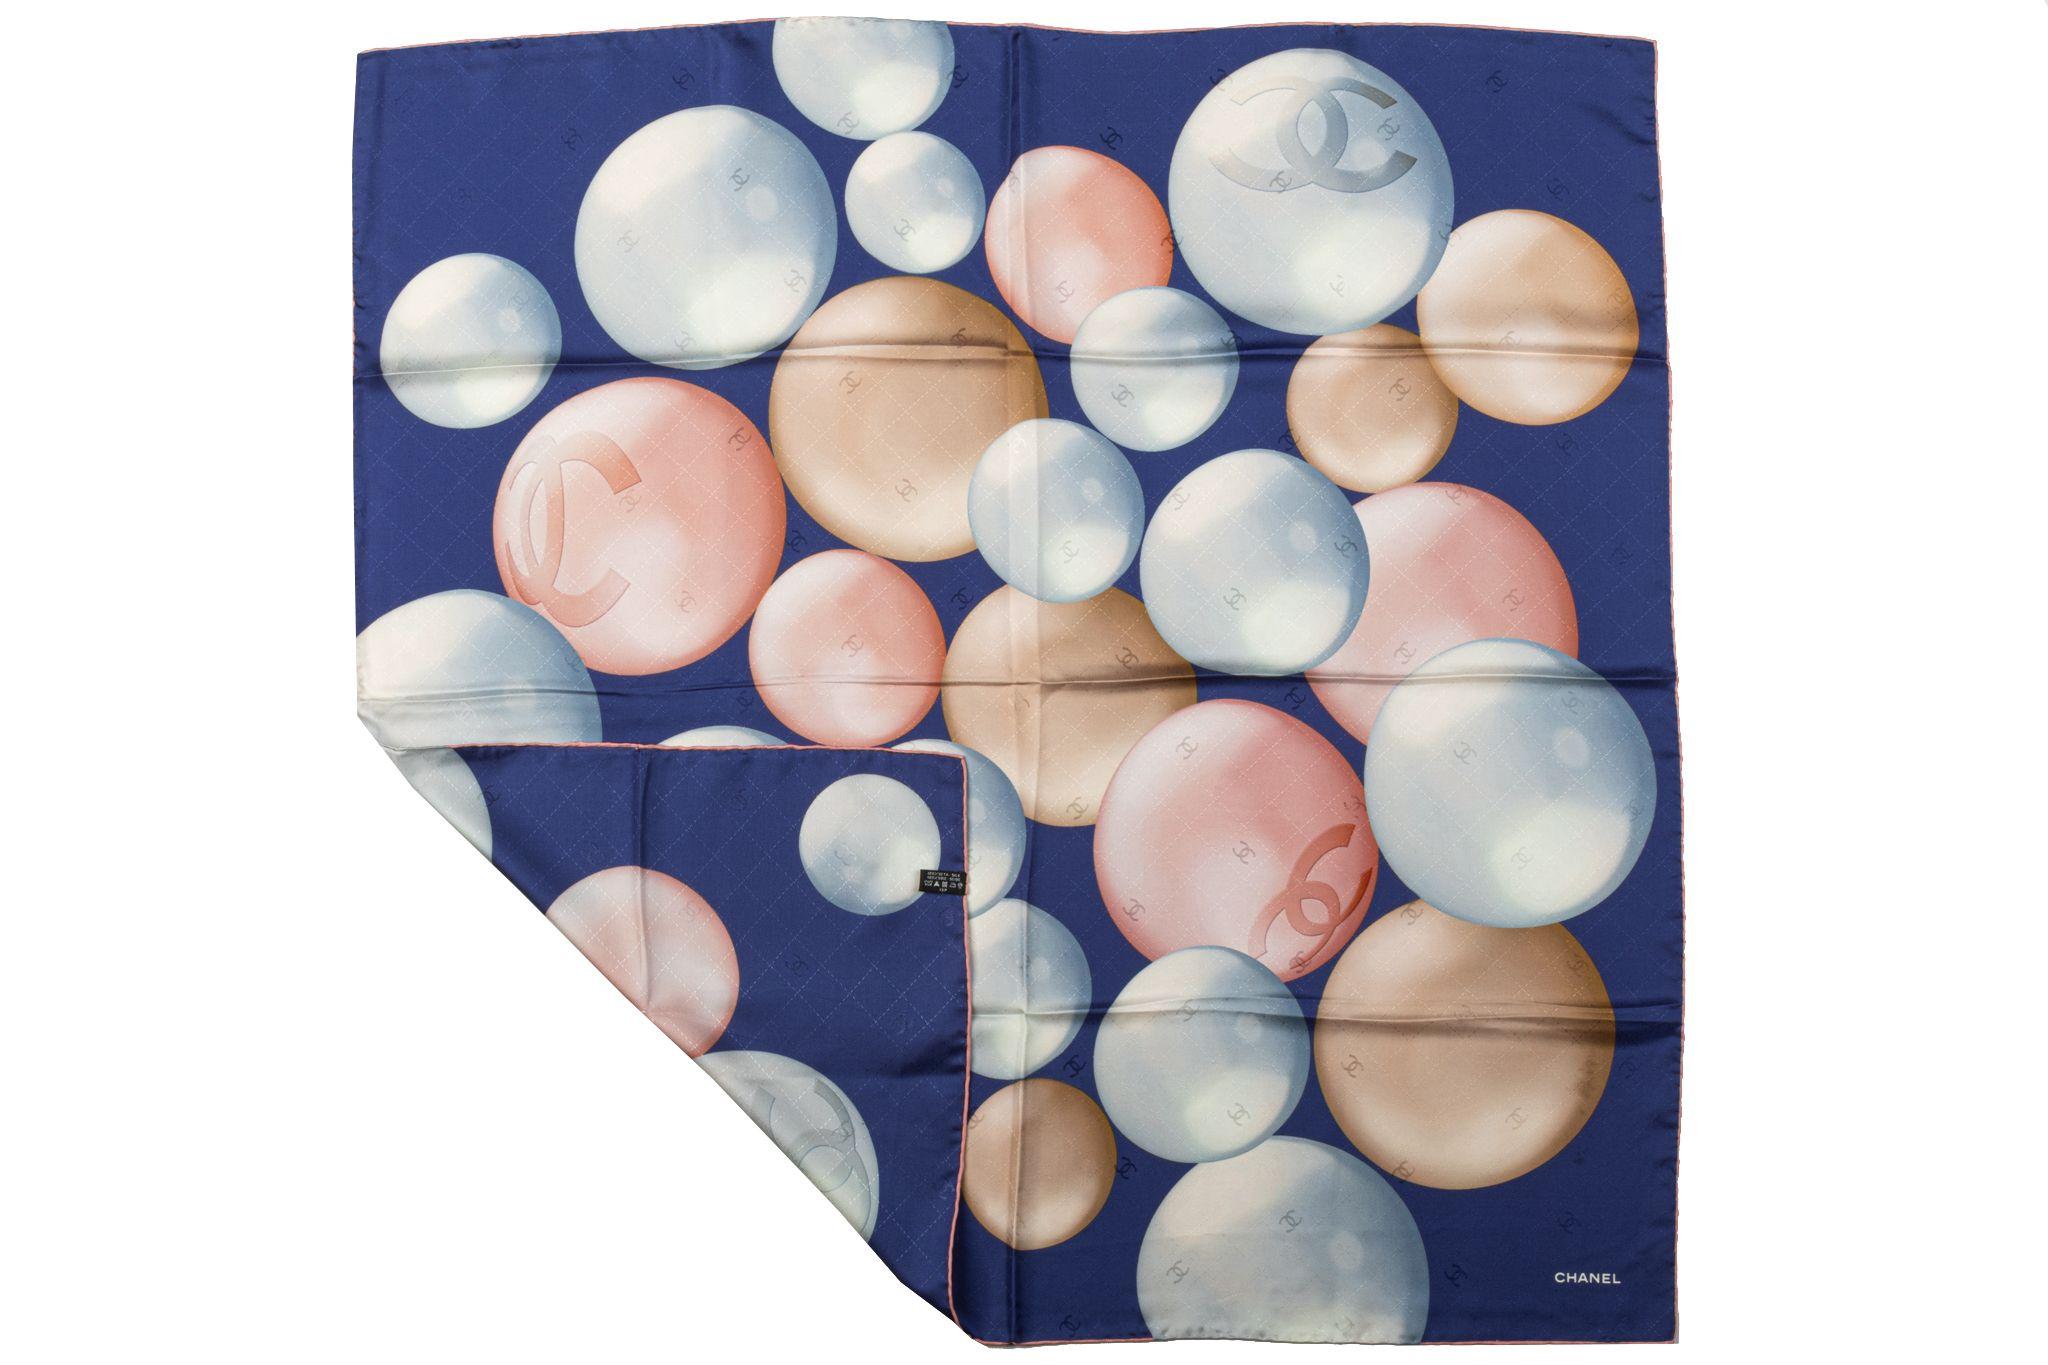 Chanel new blue silk scarf with pearls design. Hand rolled edges.